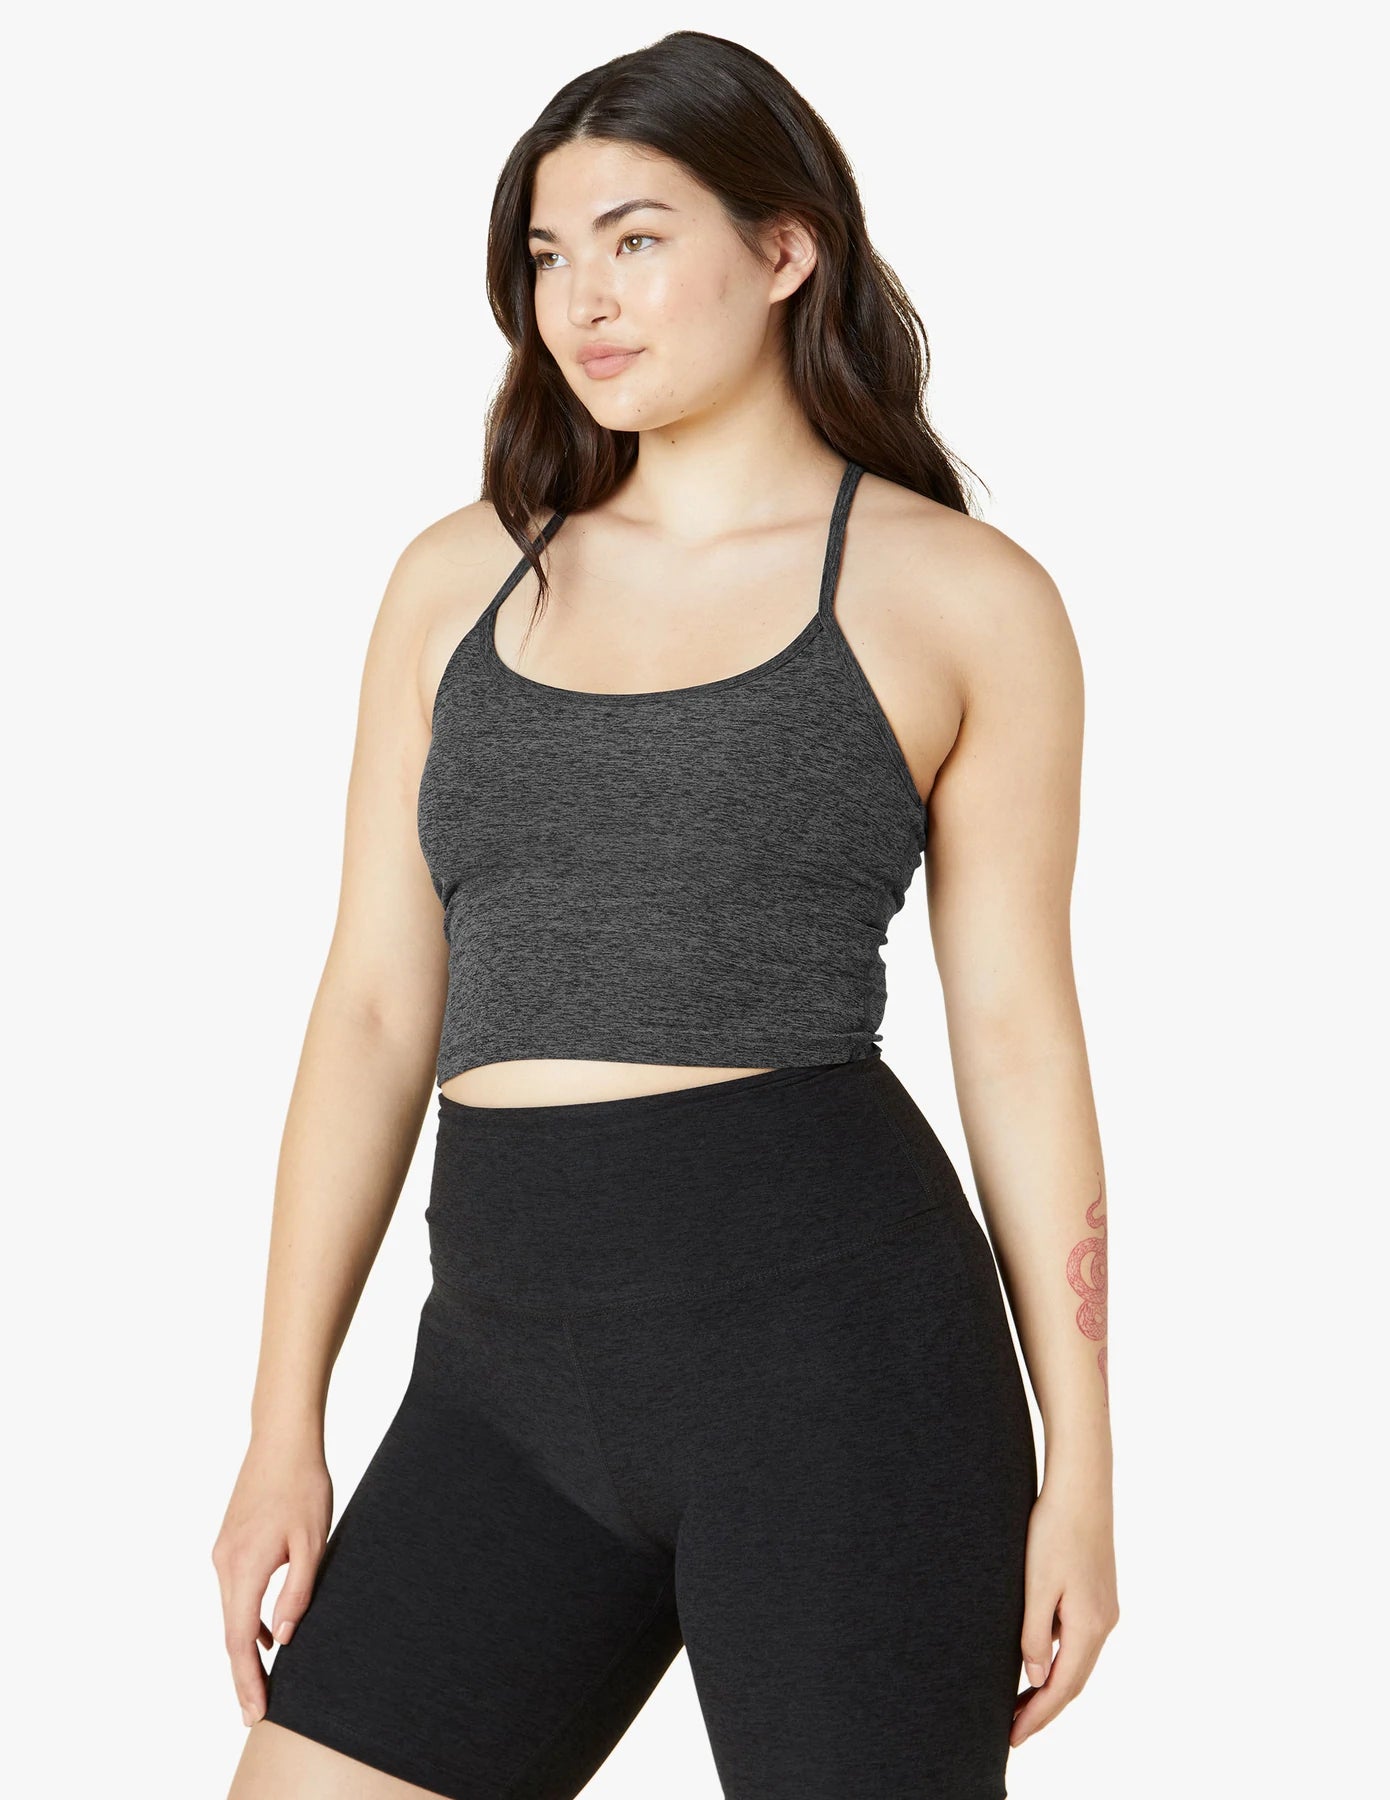 It's everyone's favorite super soft Spacedye! This best-selling skinny racerback tank features a shelf bra for medium support. With cute cropped silhouette, it's the perfect wardrobe staple. Make it a set with matching legging! 